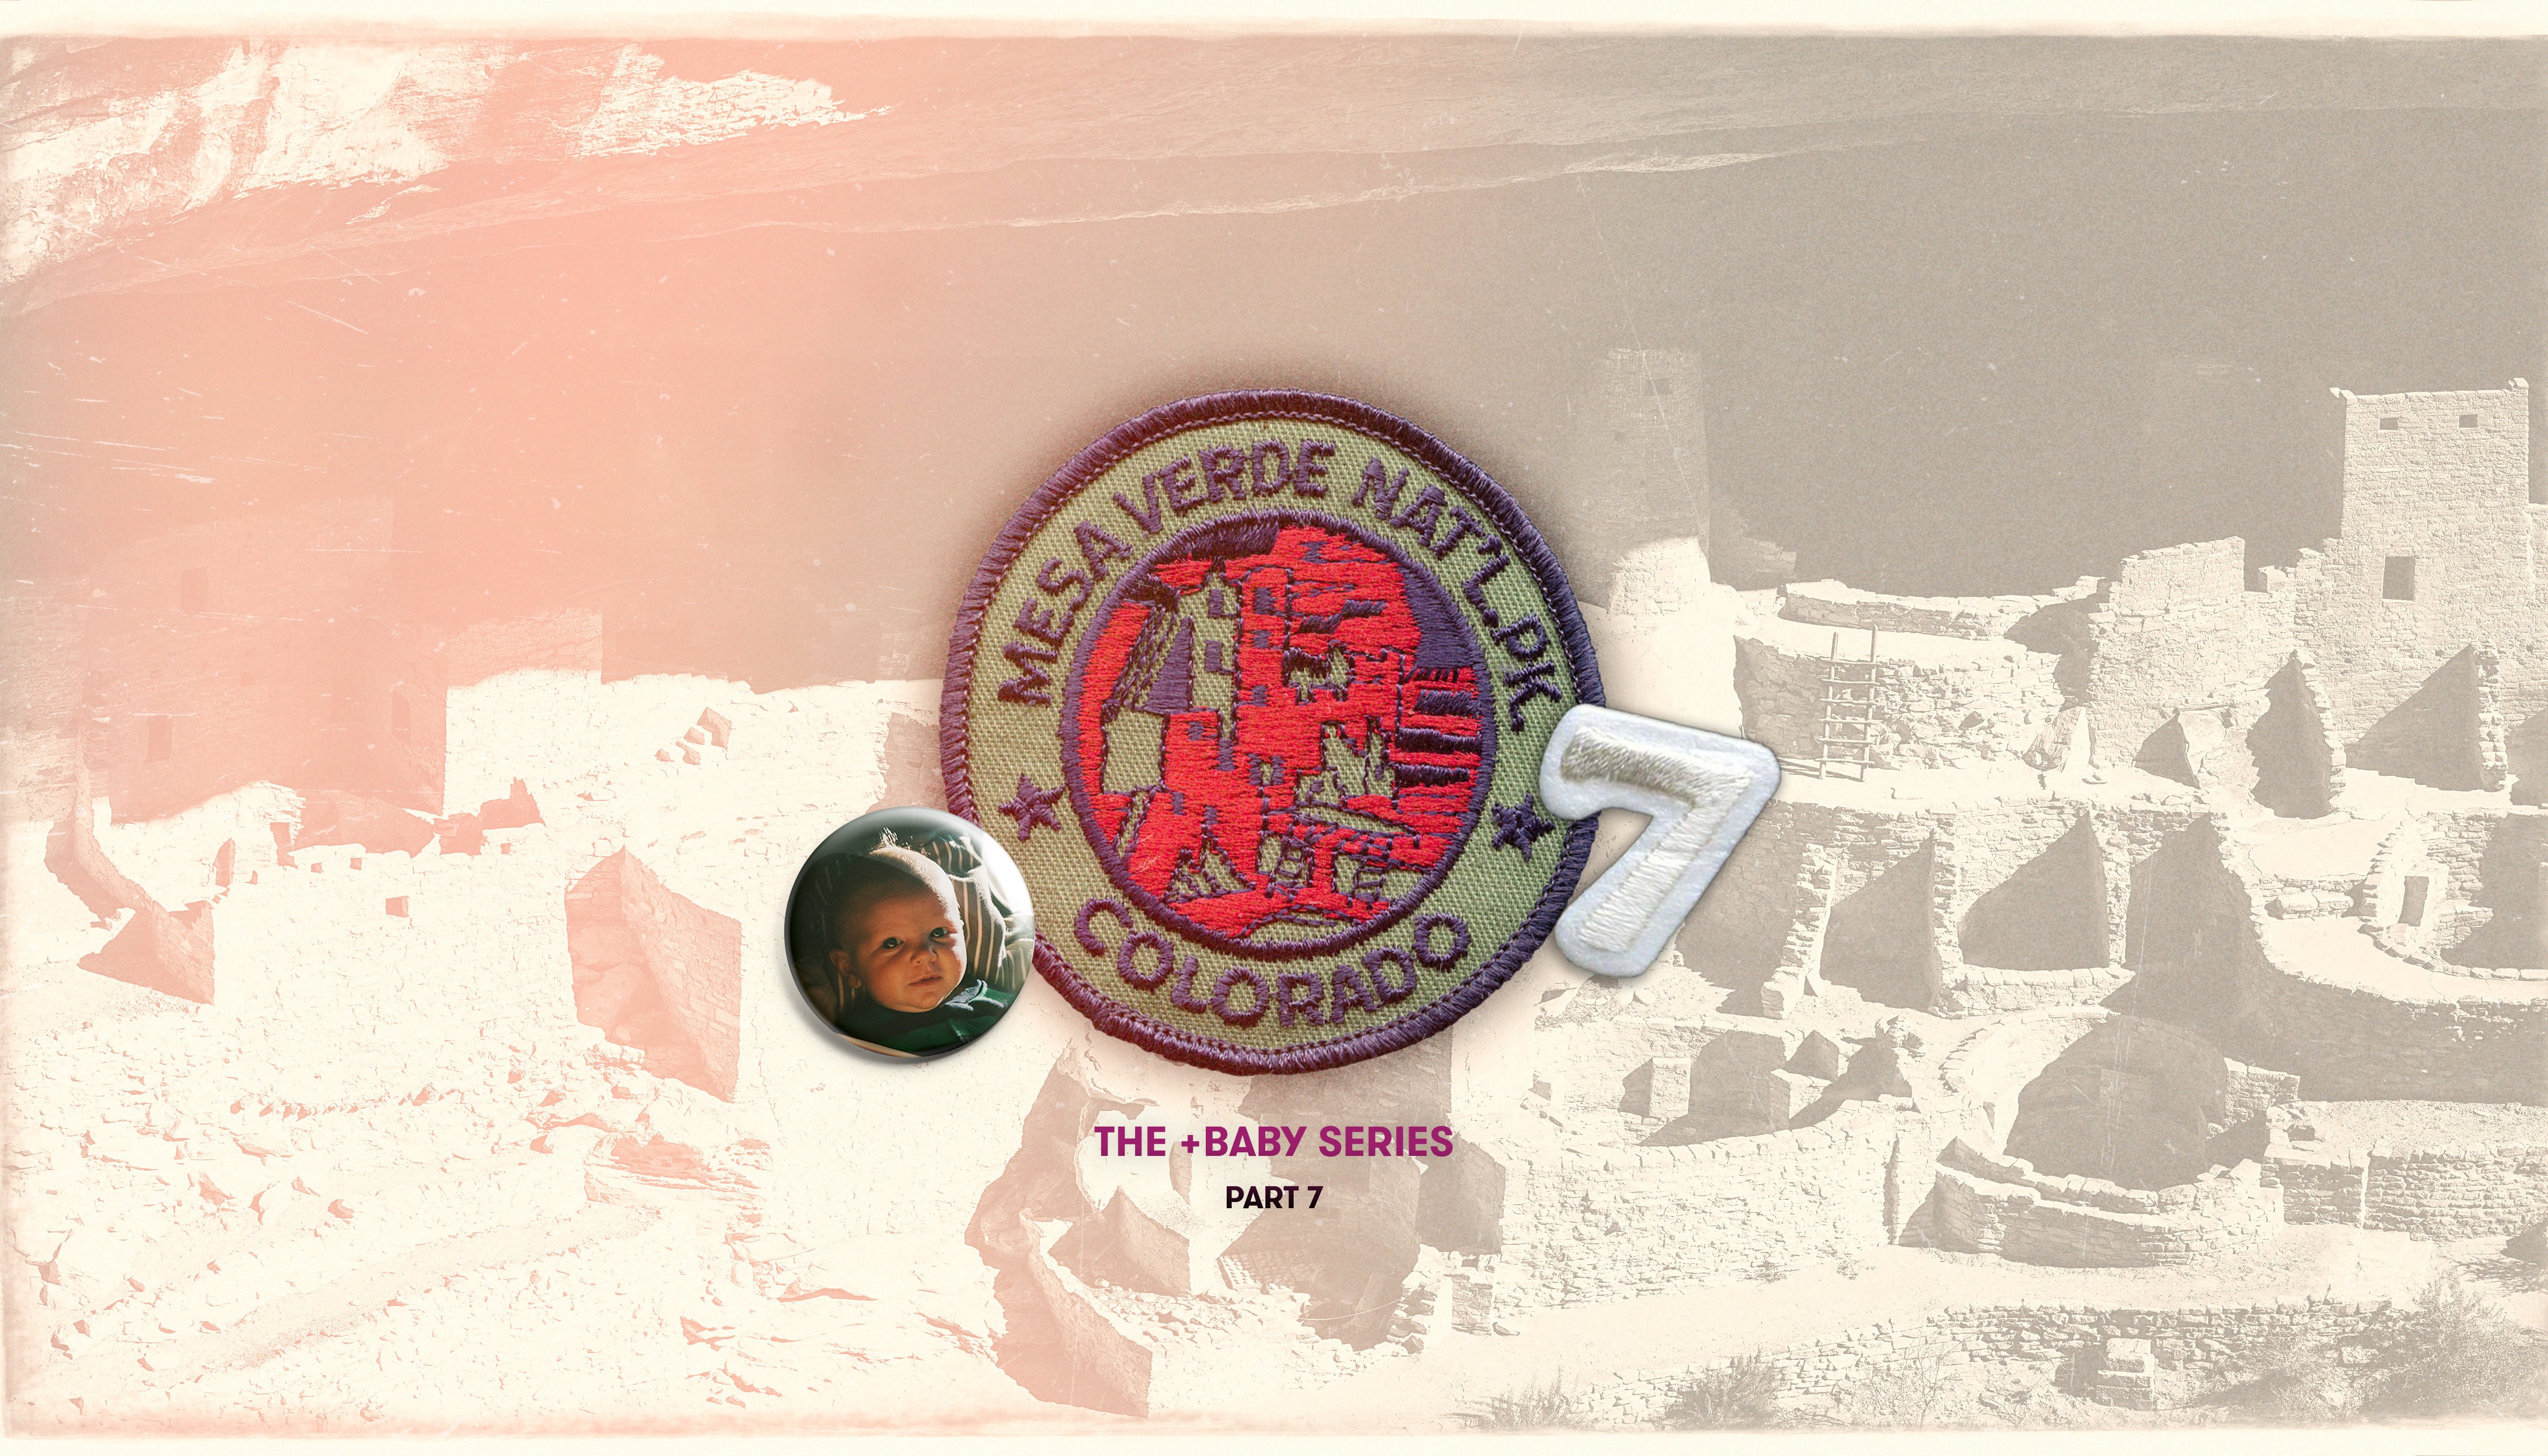 Read MESA VERDE NATIONAL PARK + BABY by Tommy Nagle